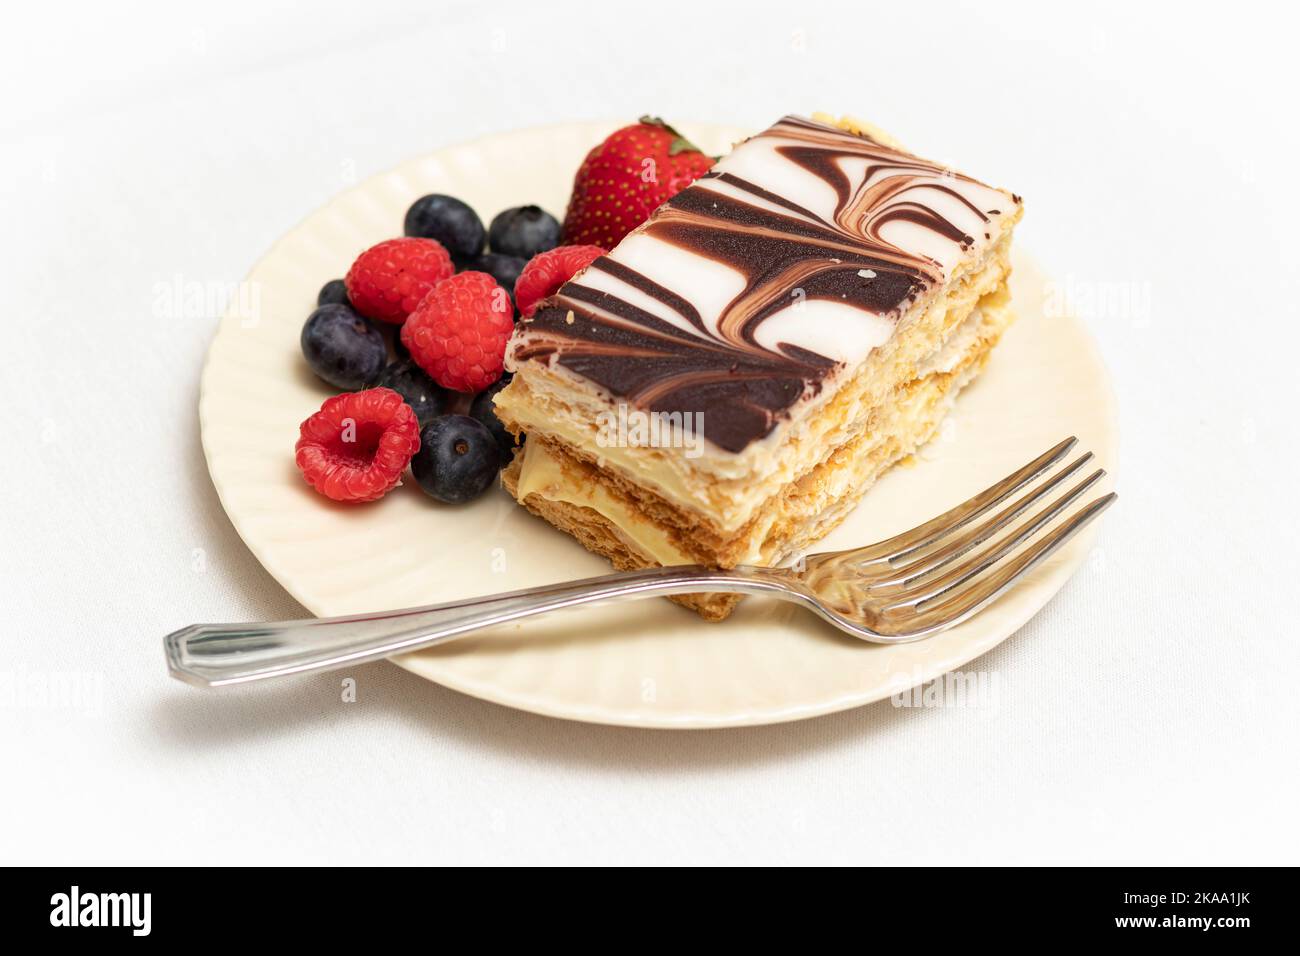 Napoleon dessert pastry and colorful mixed berries plated with silver fork. Stock Photo